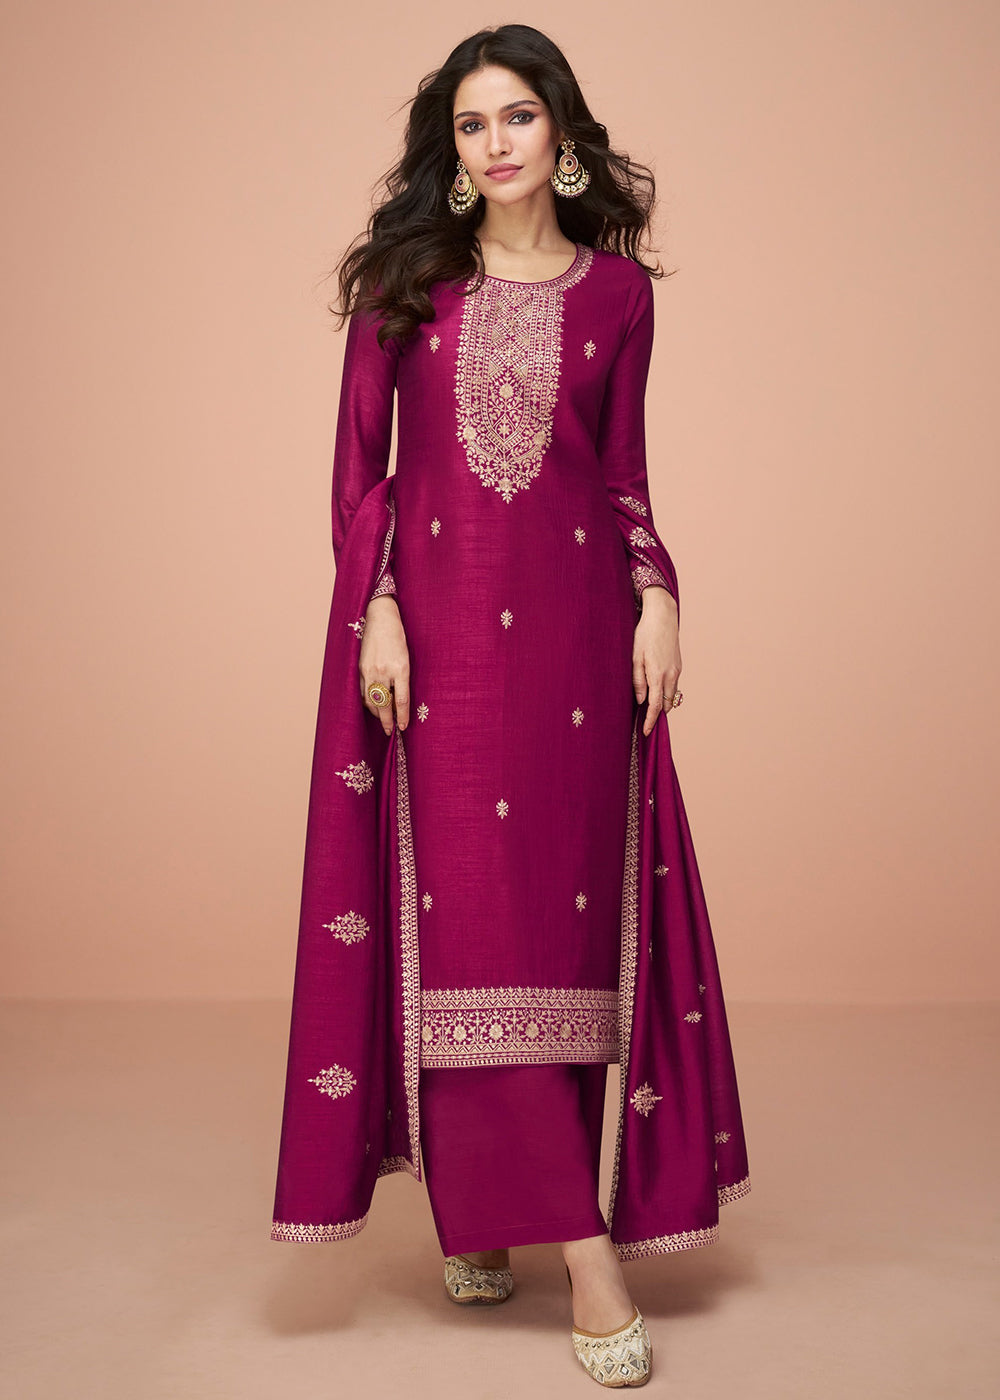 Buy Now Tempting Magenta Silk Embroidered Palazzo Salwar Suit Online in USA, UK, Canada, Germany, Australia & Worldwide at Empress Clothing.